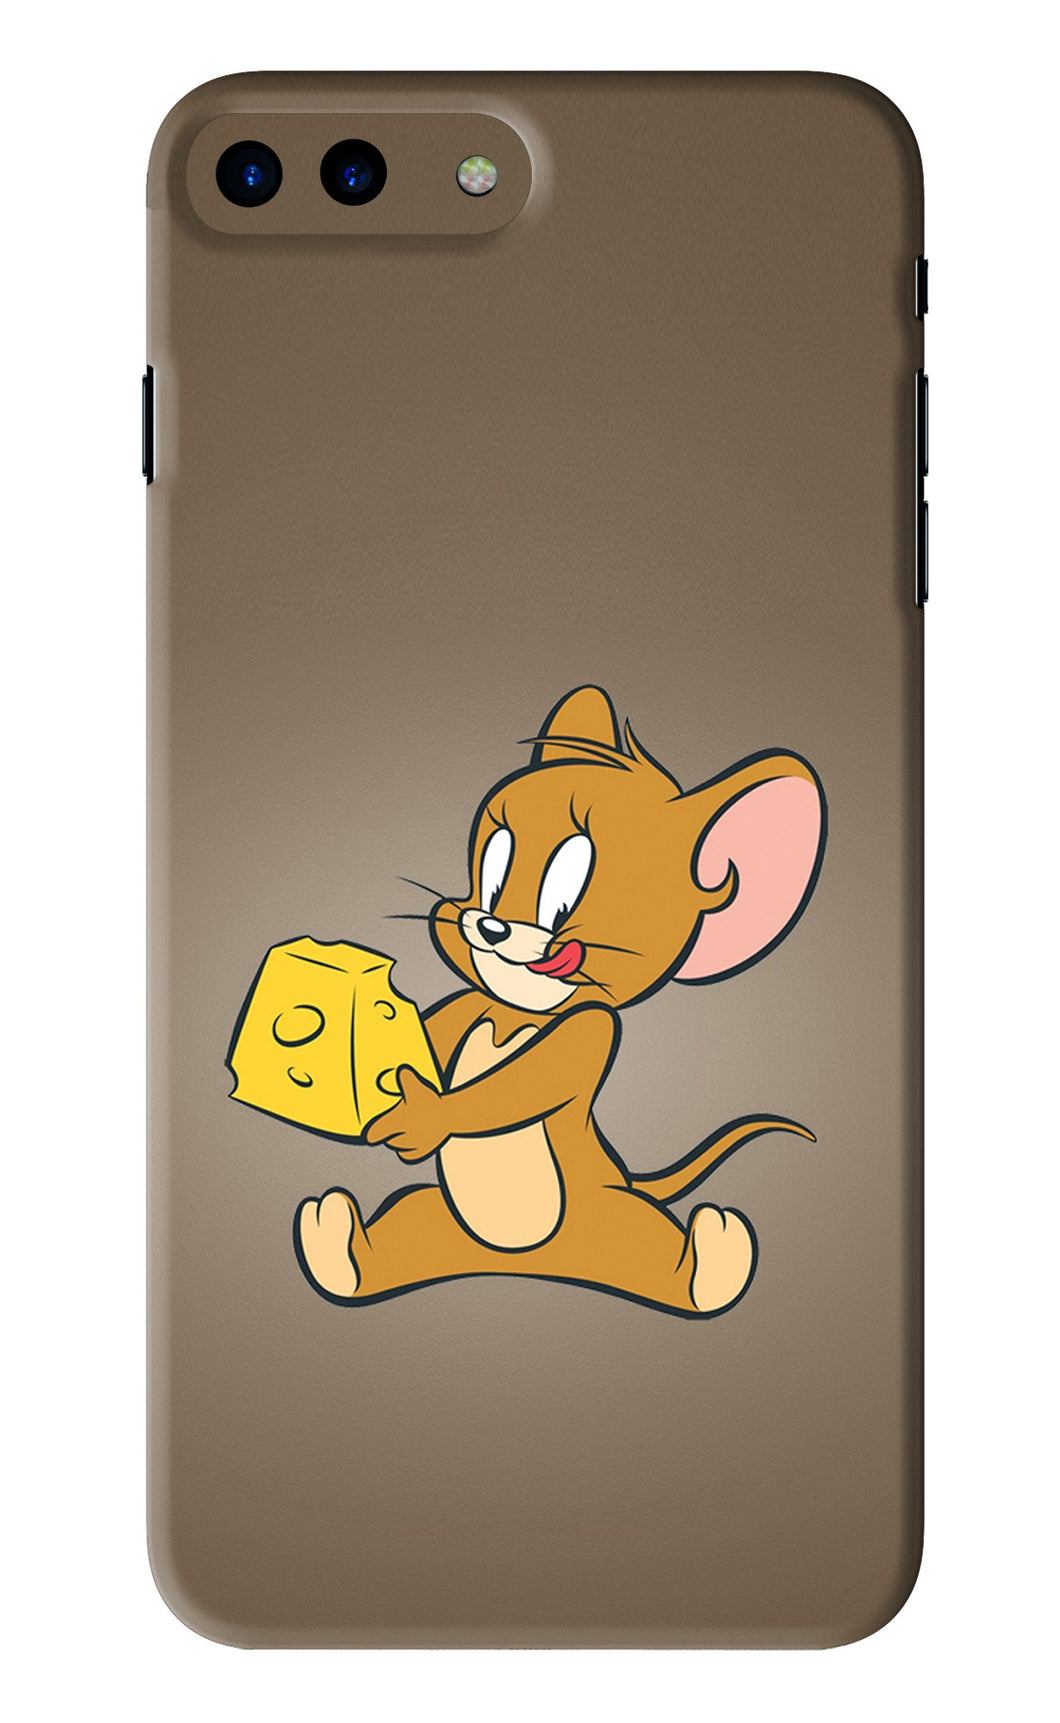 Jerry iPhone 7 Plus Back Skin Wrap